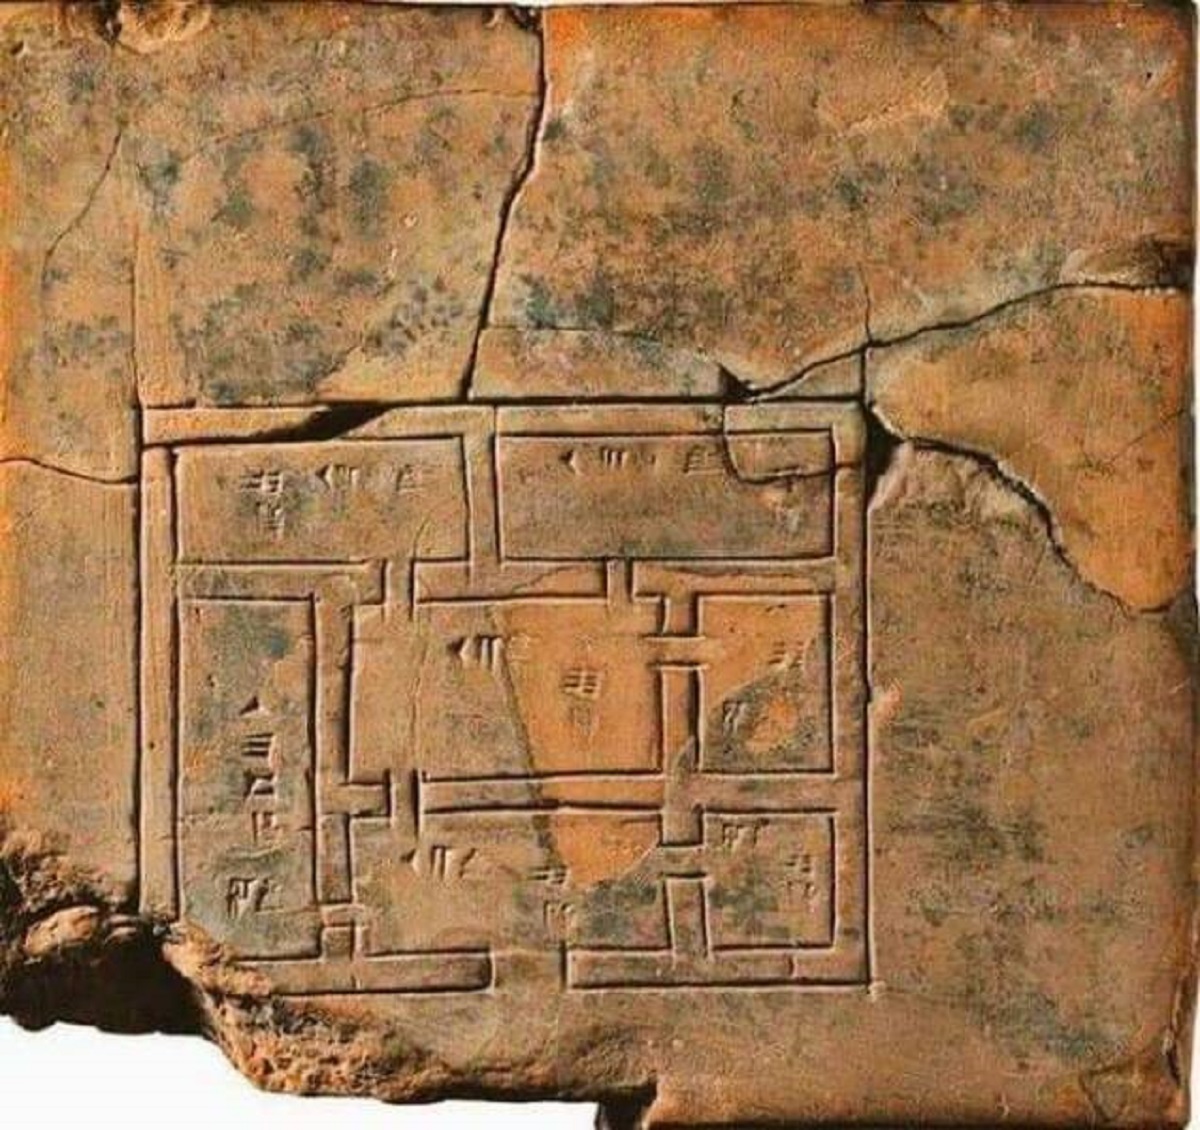 House plan developed by the Sumerians about 5,000 years ago.